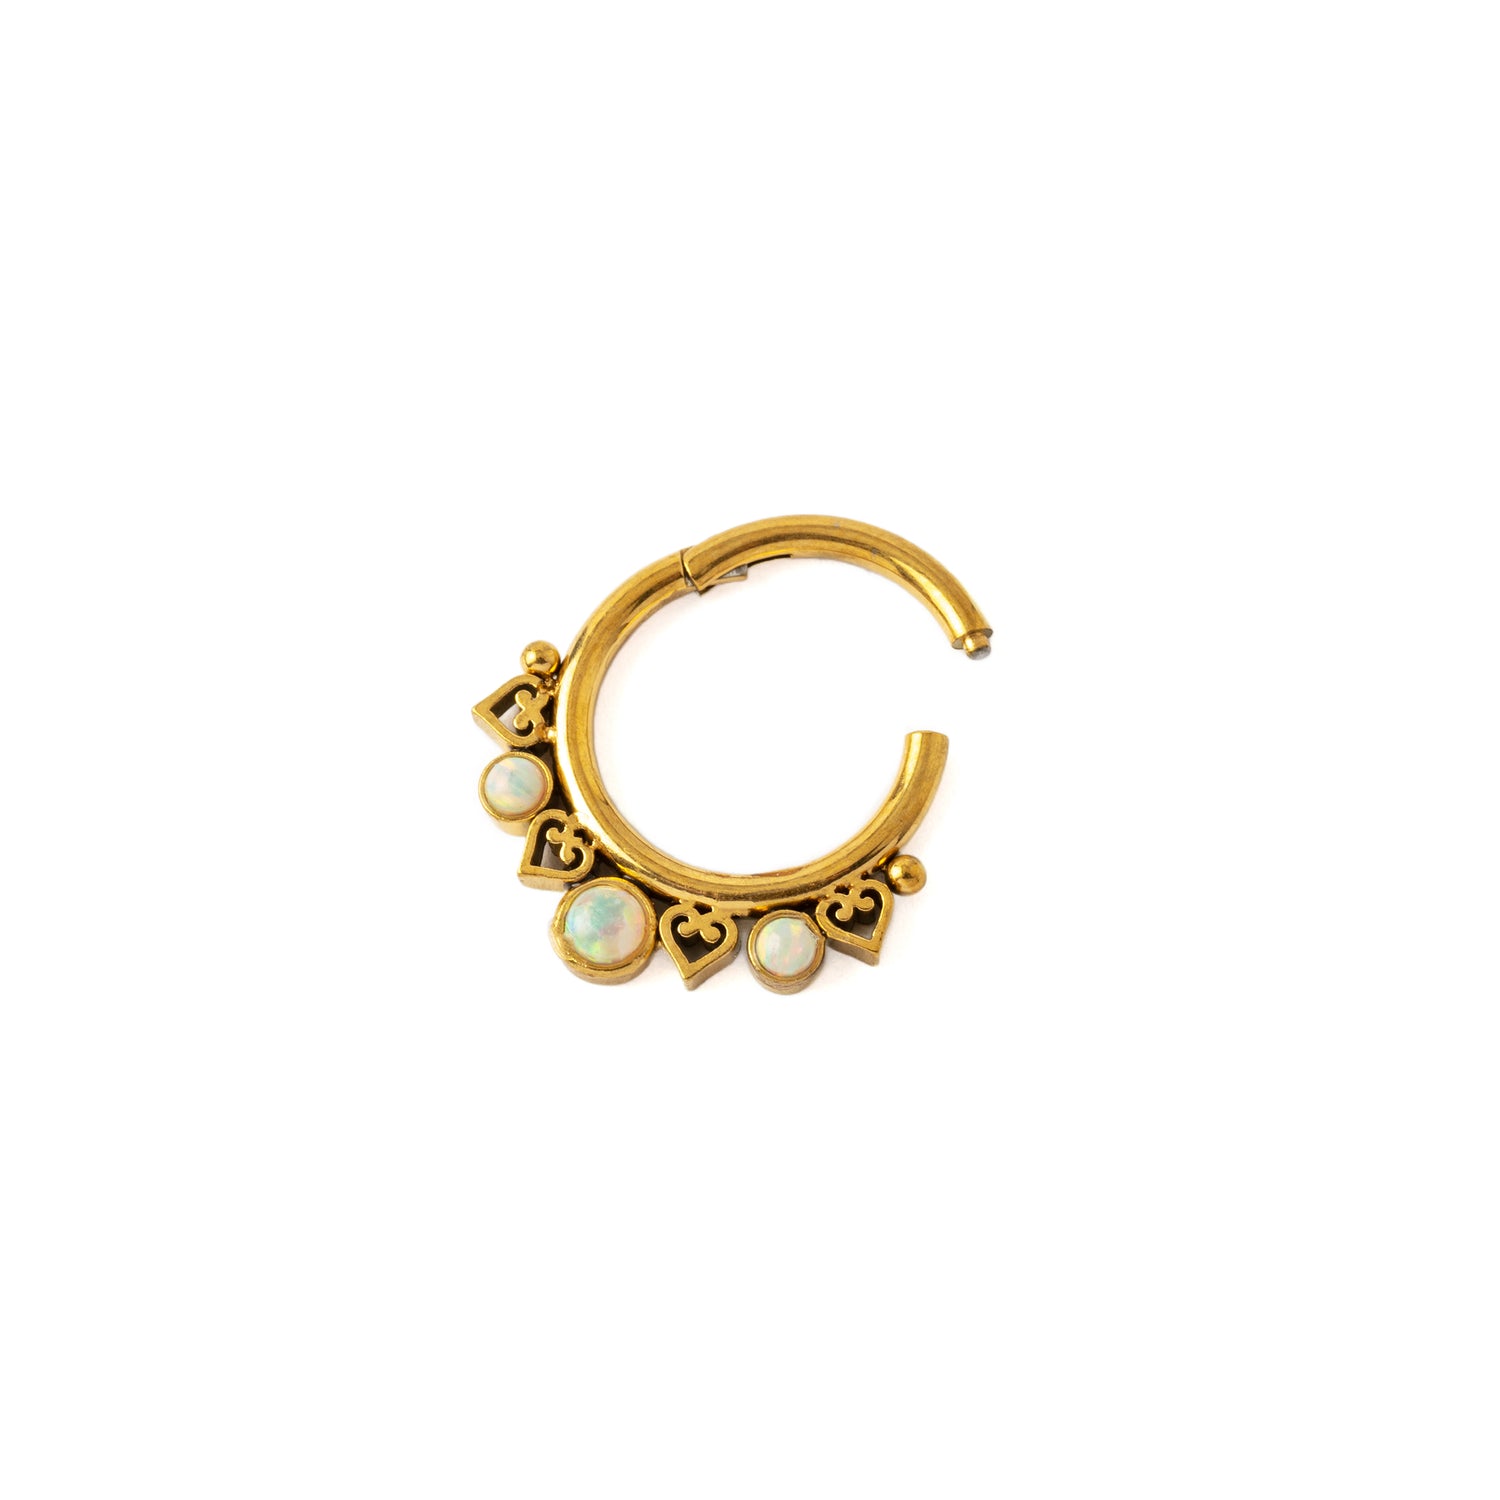 Golden Neptune Septum Clicker with White Opal hinge view